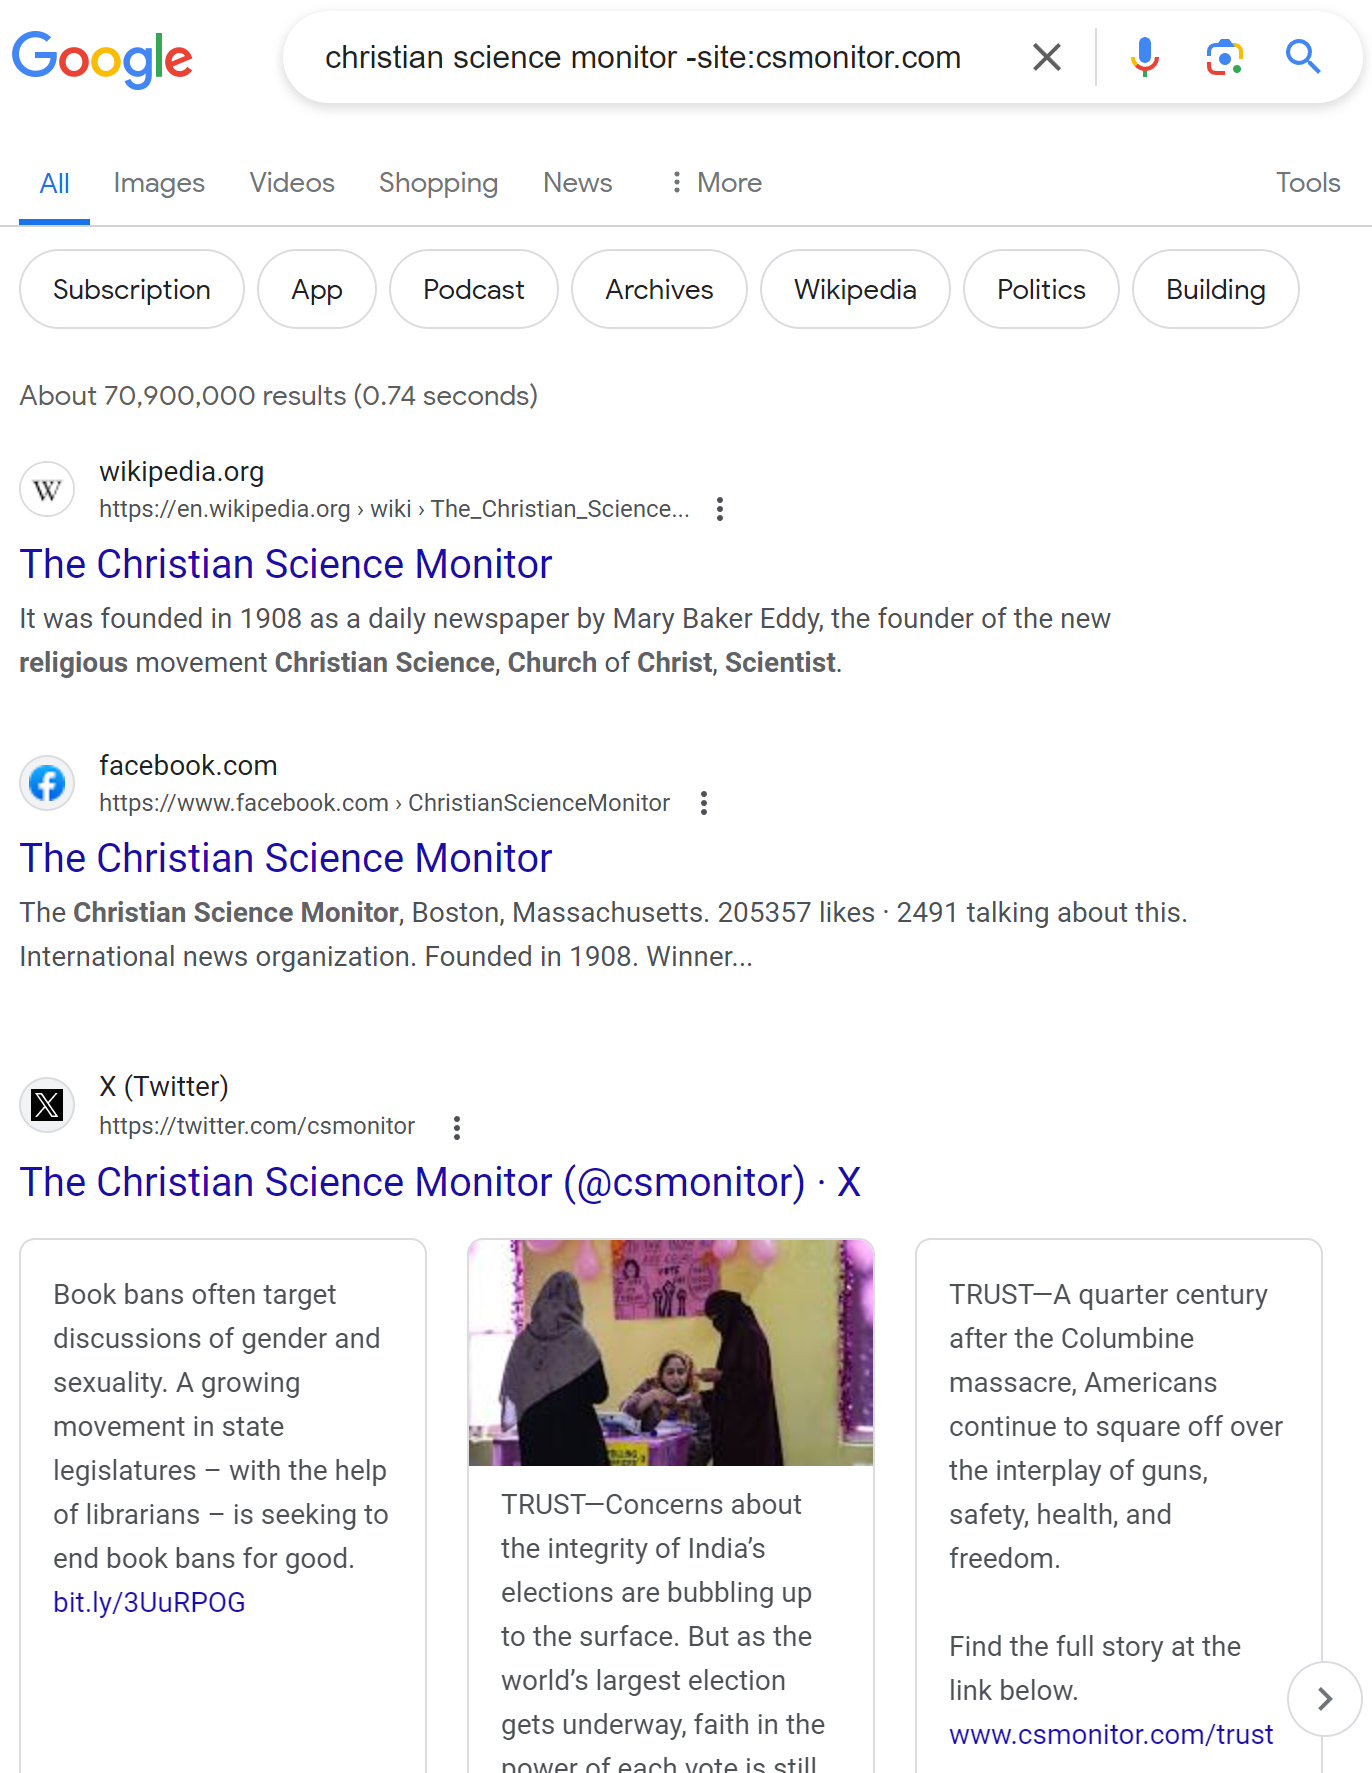 Christian Science Monitor Google search results